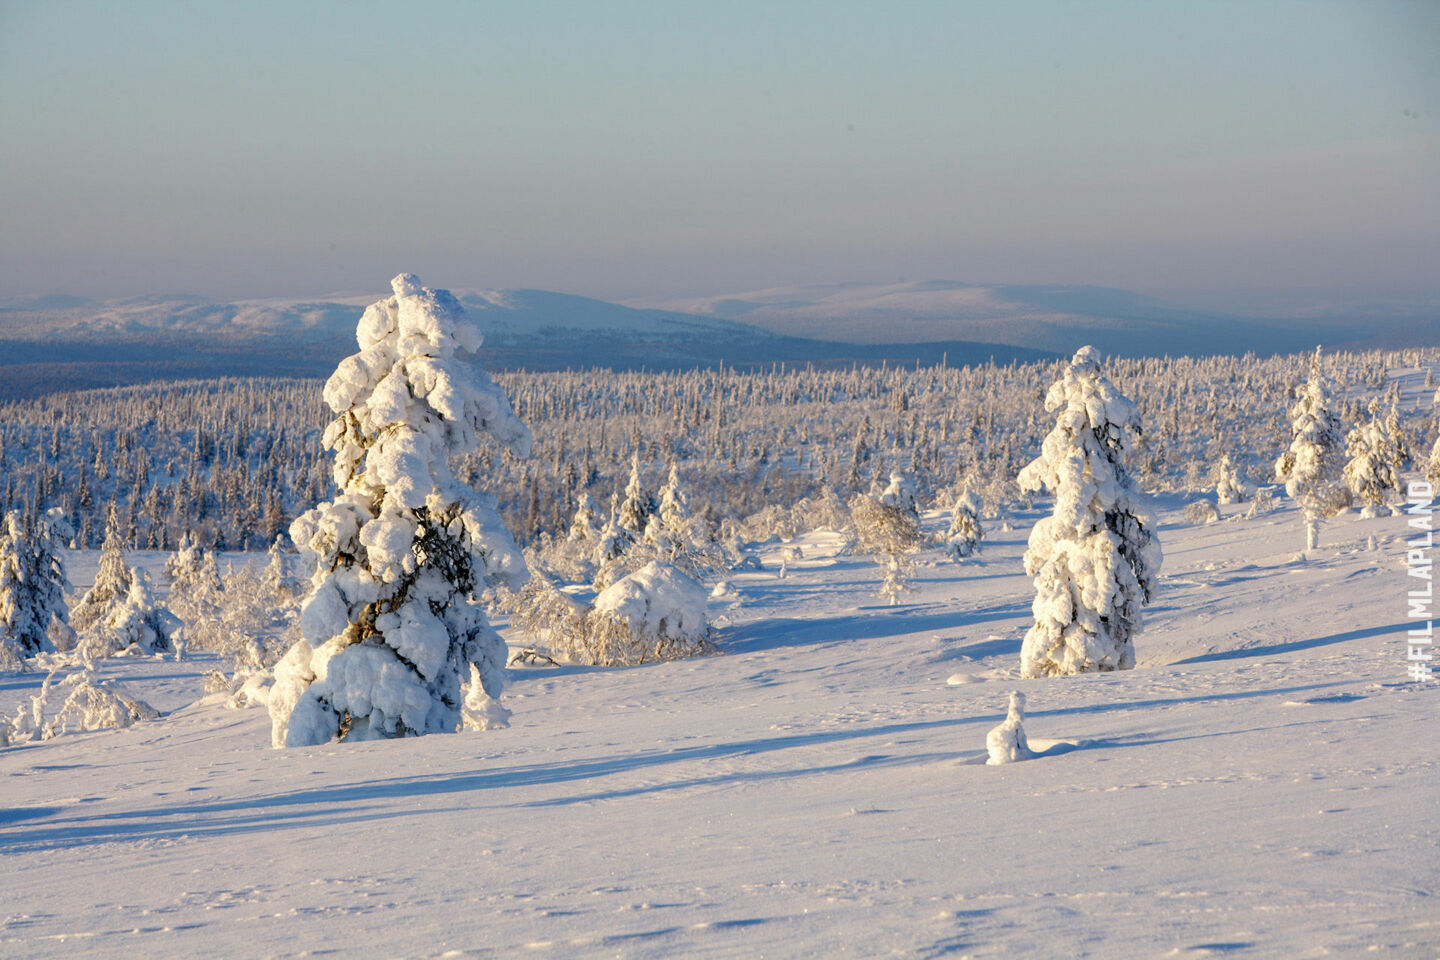 A sunny spring day in Inari, a Finnish Lapland filming location